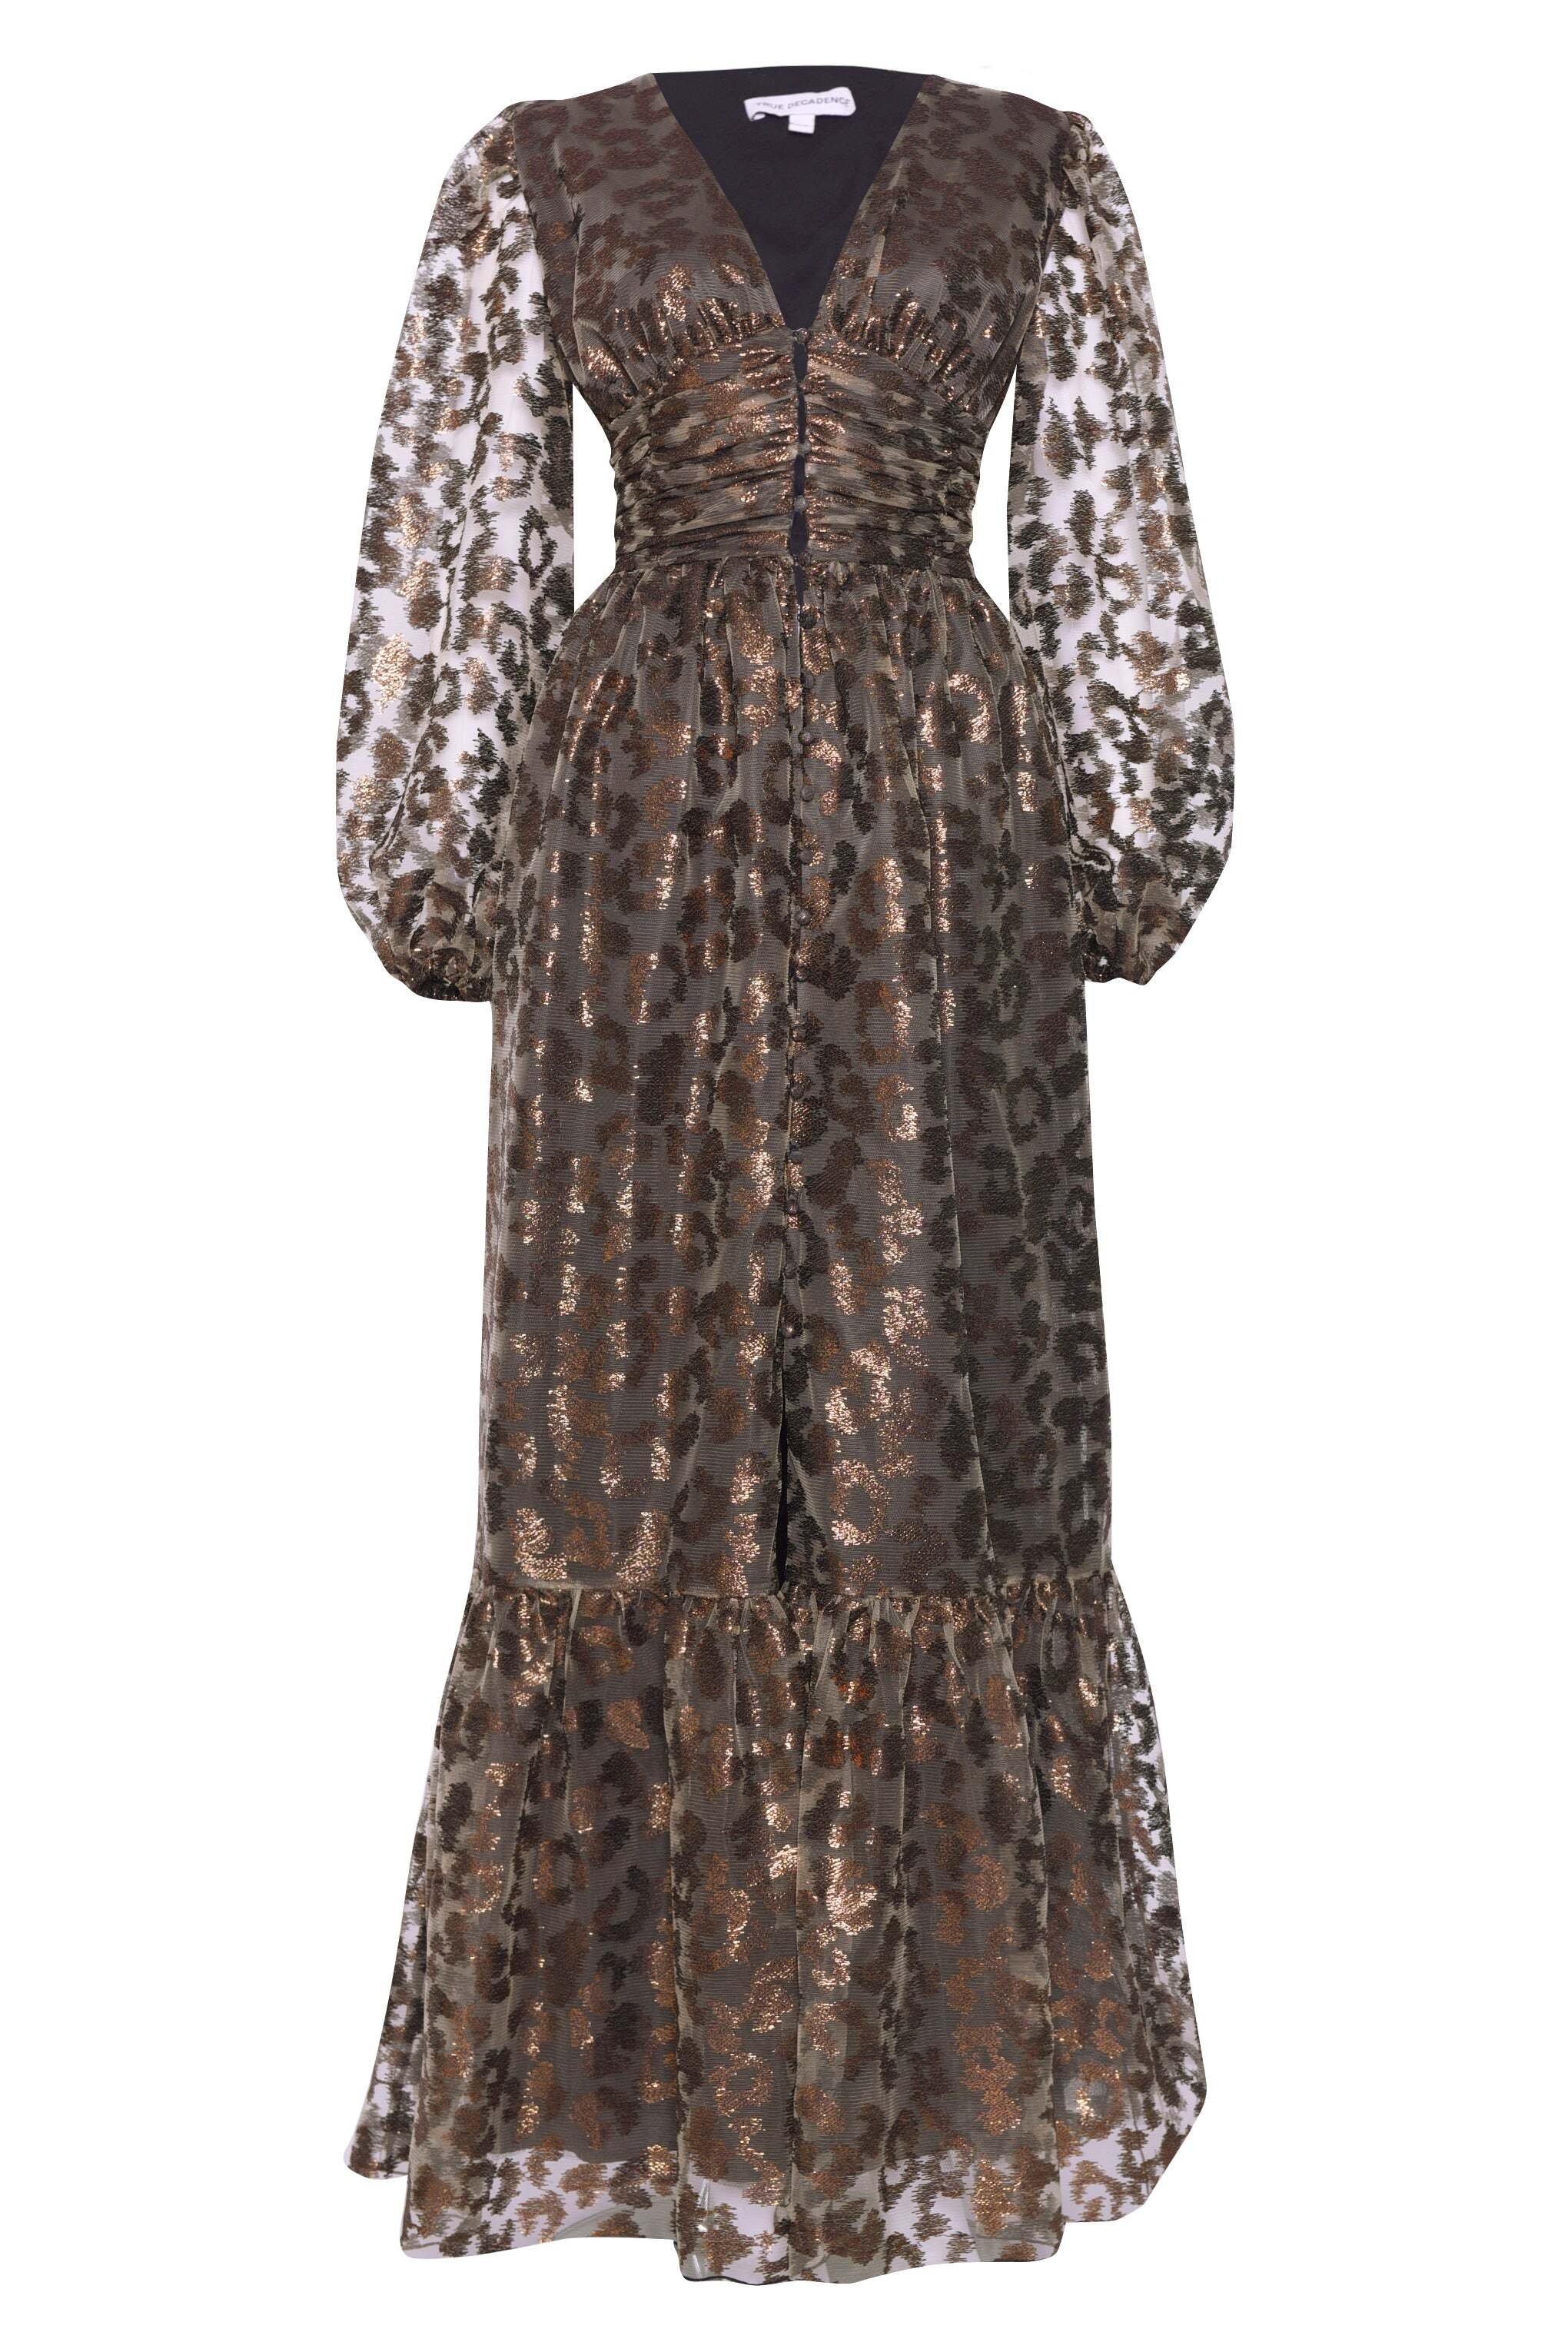 True Decadence Bronze Metallic Leopard Plunge Button Front Maxi Womens Clothing Dresses Casual and summer maxi dresses 